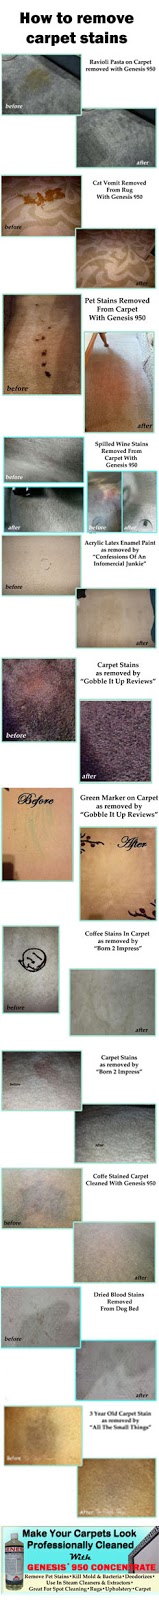 best carpet cleaning solution